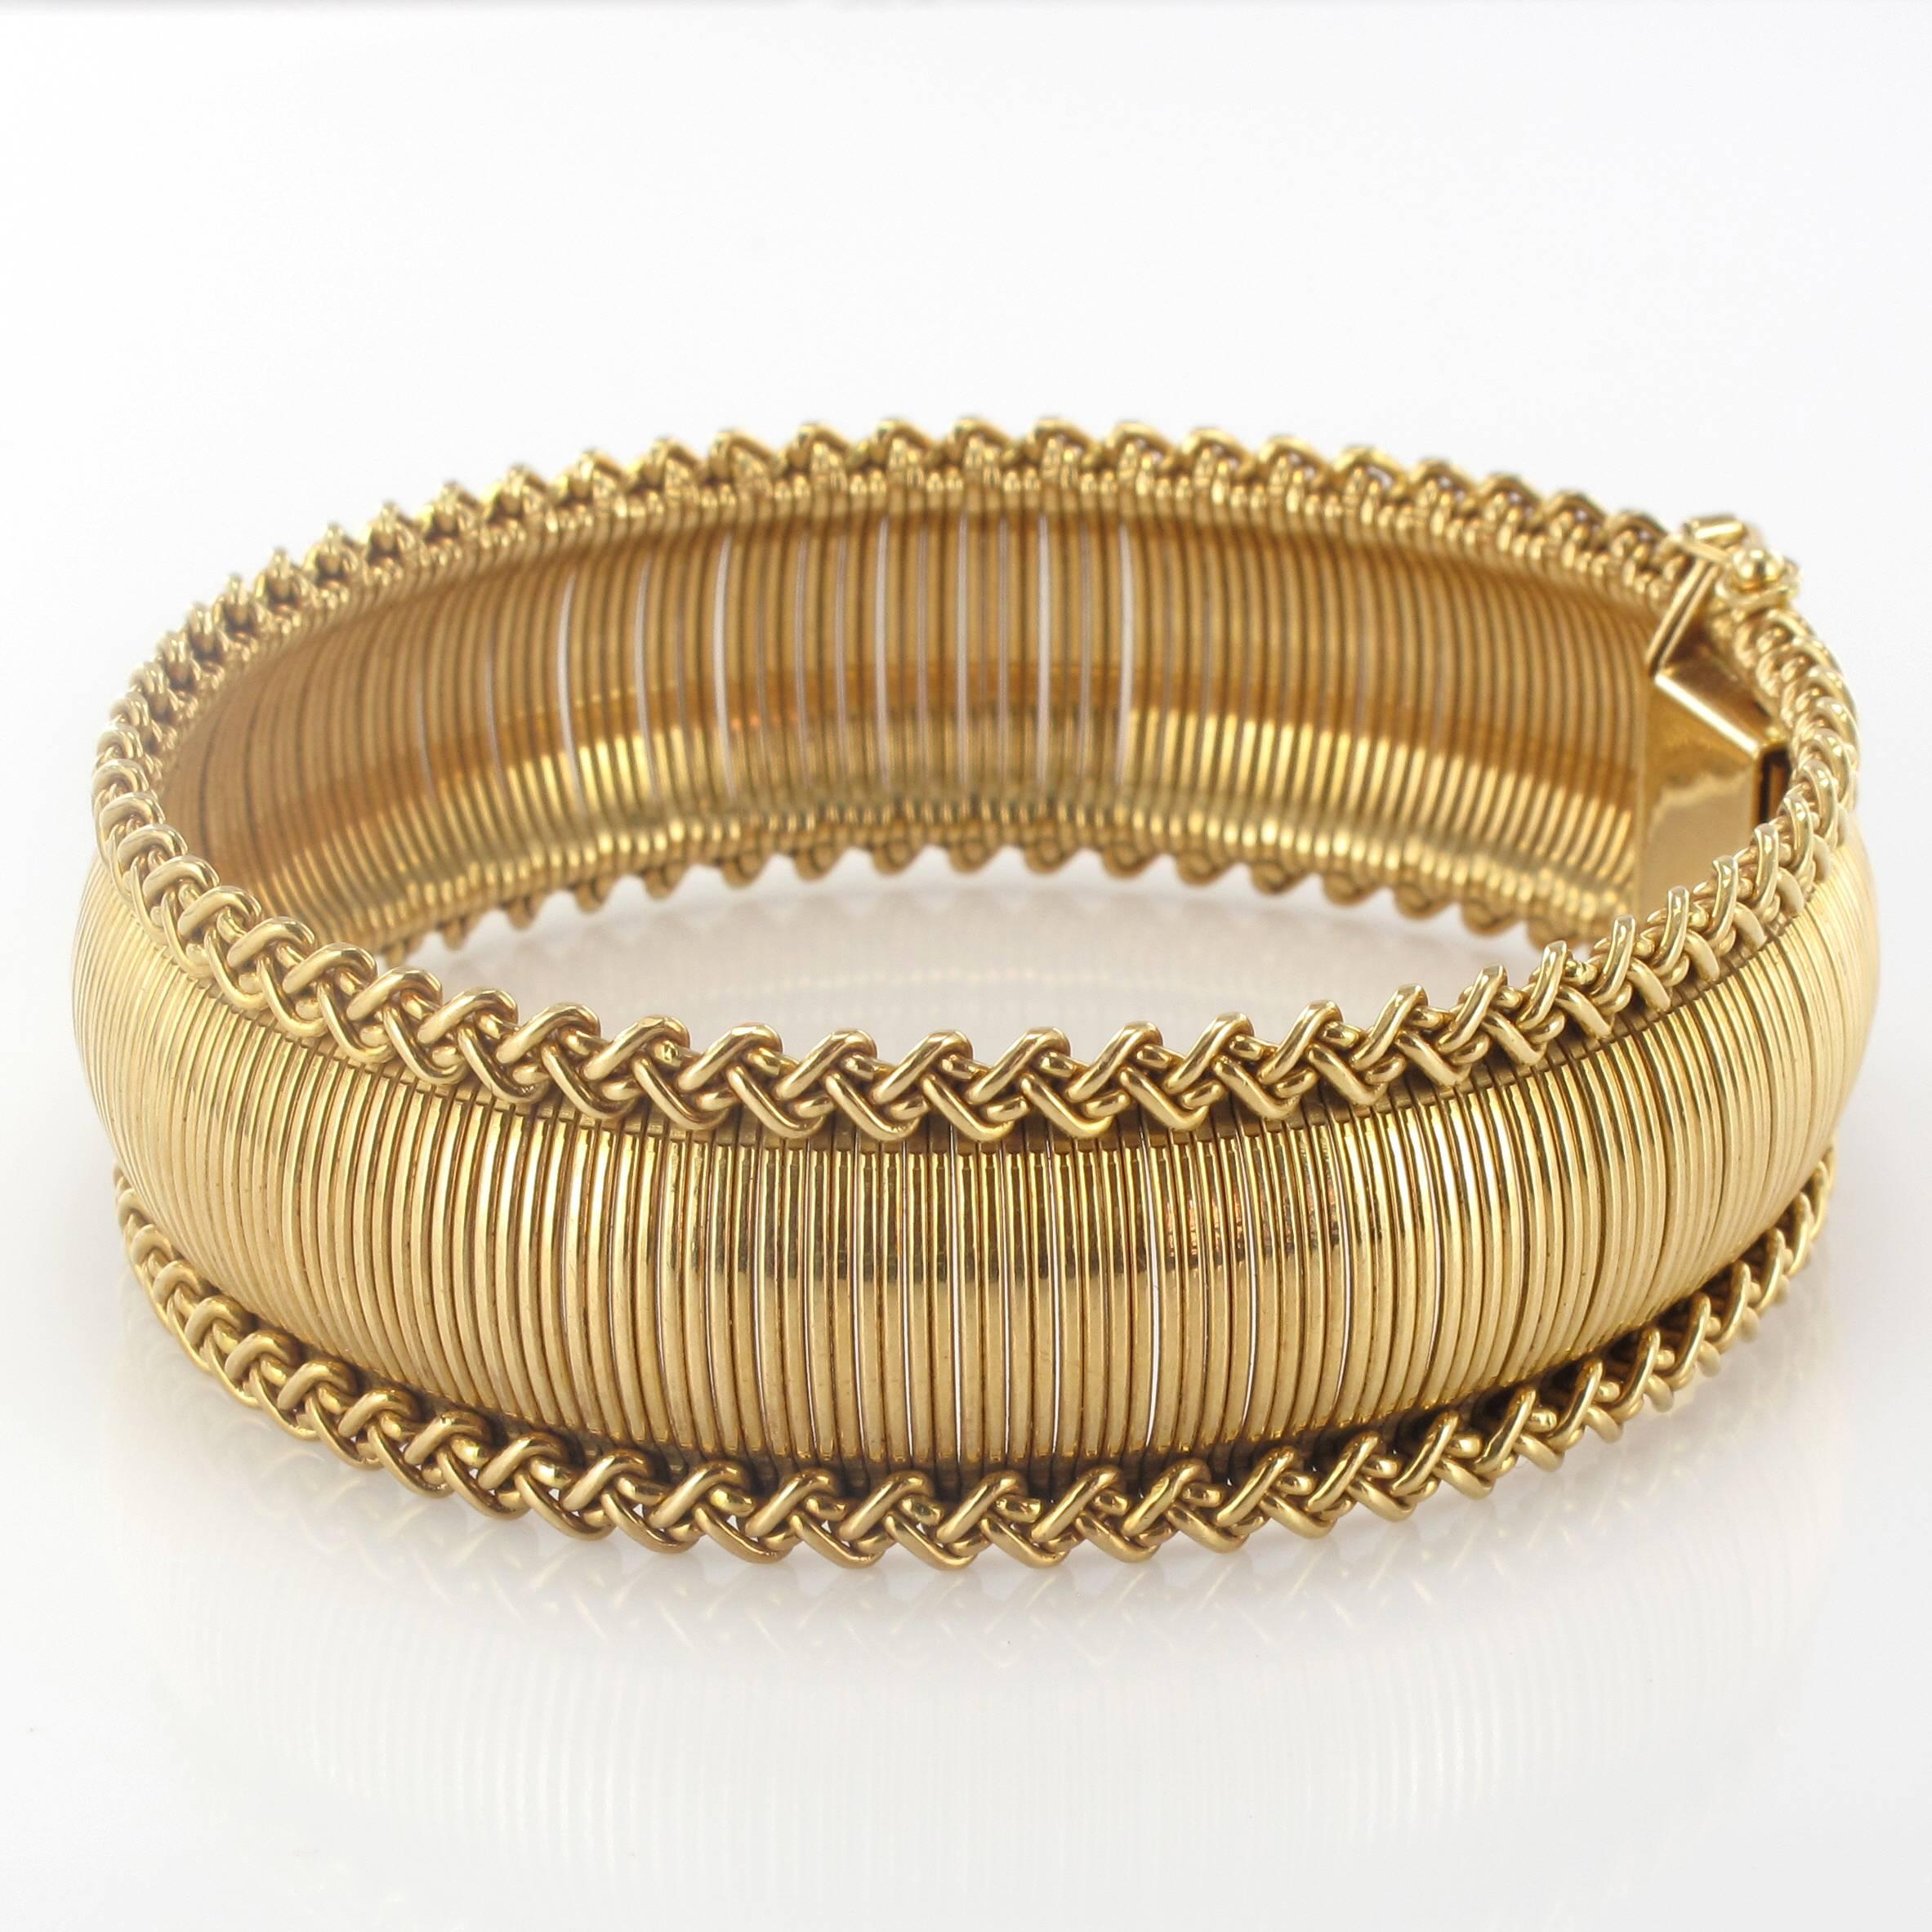 Bracelet in 18 carat yellow gold, rhinoceros hallmark. 
The mesh resembles golden baize edged with gold braid. The clasp is a ratchet with a safety ‘8’. 
Length: 19 cm, width: 2 cm.
Total weight : 50.4 g approximately.
Authentic vintage bracelet –